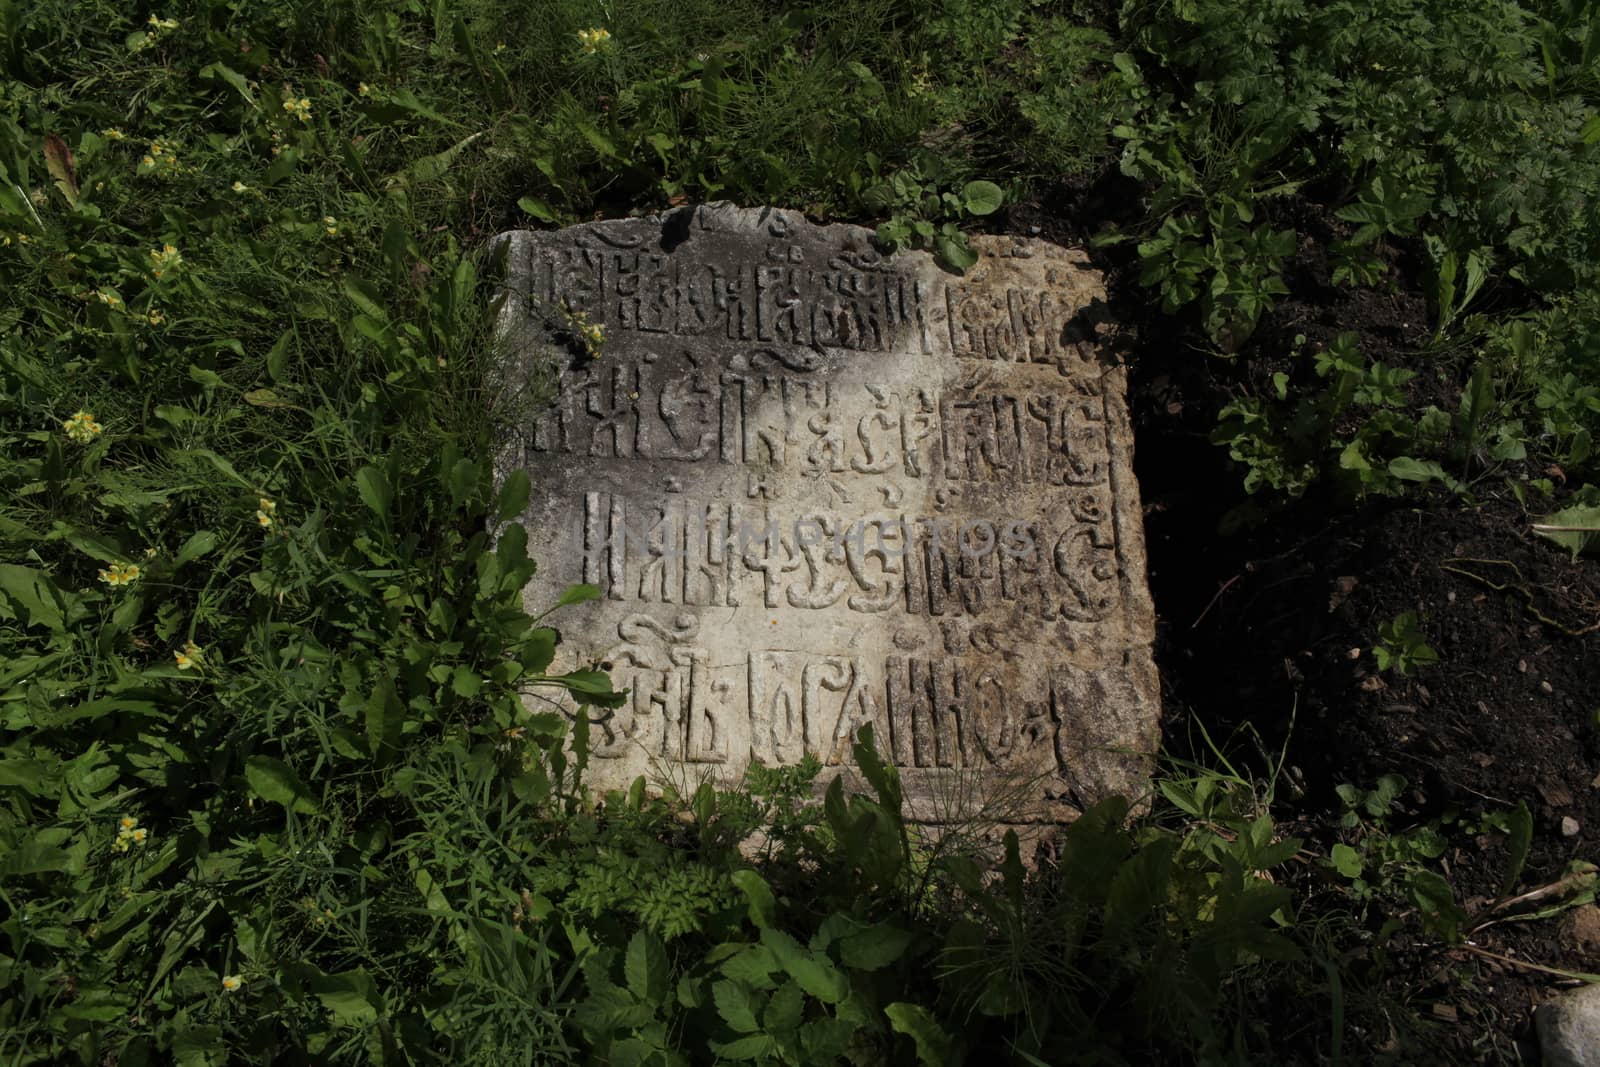 fragment of ancient gravestone inscription in the ancient language close to